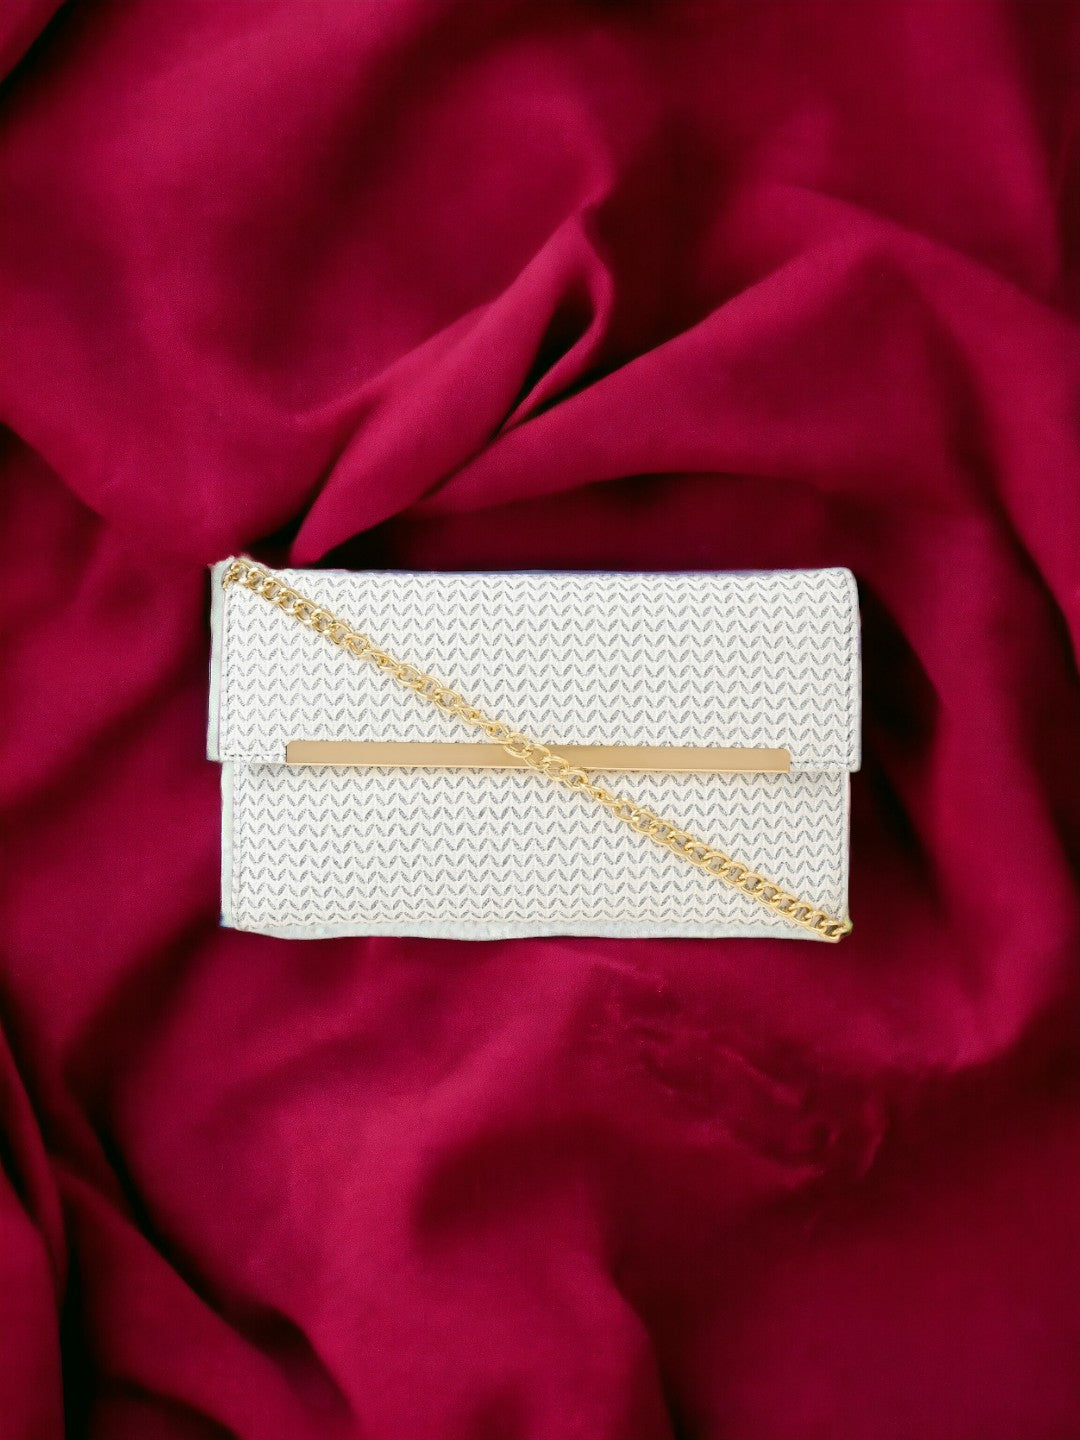 A silver clutch on a red sheet. 